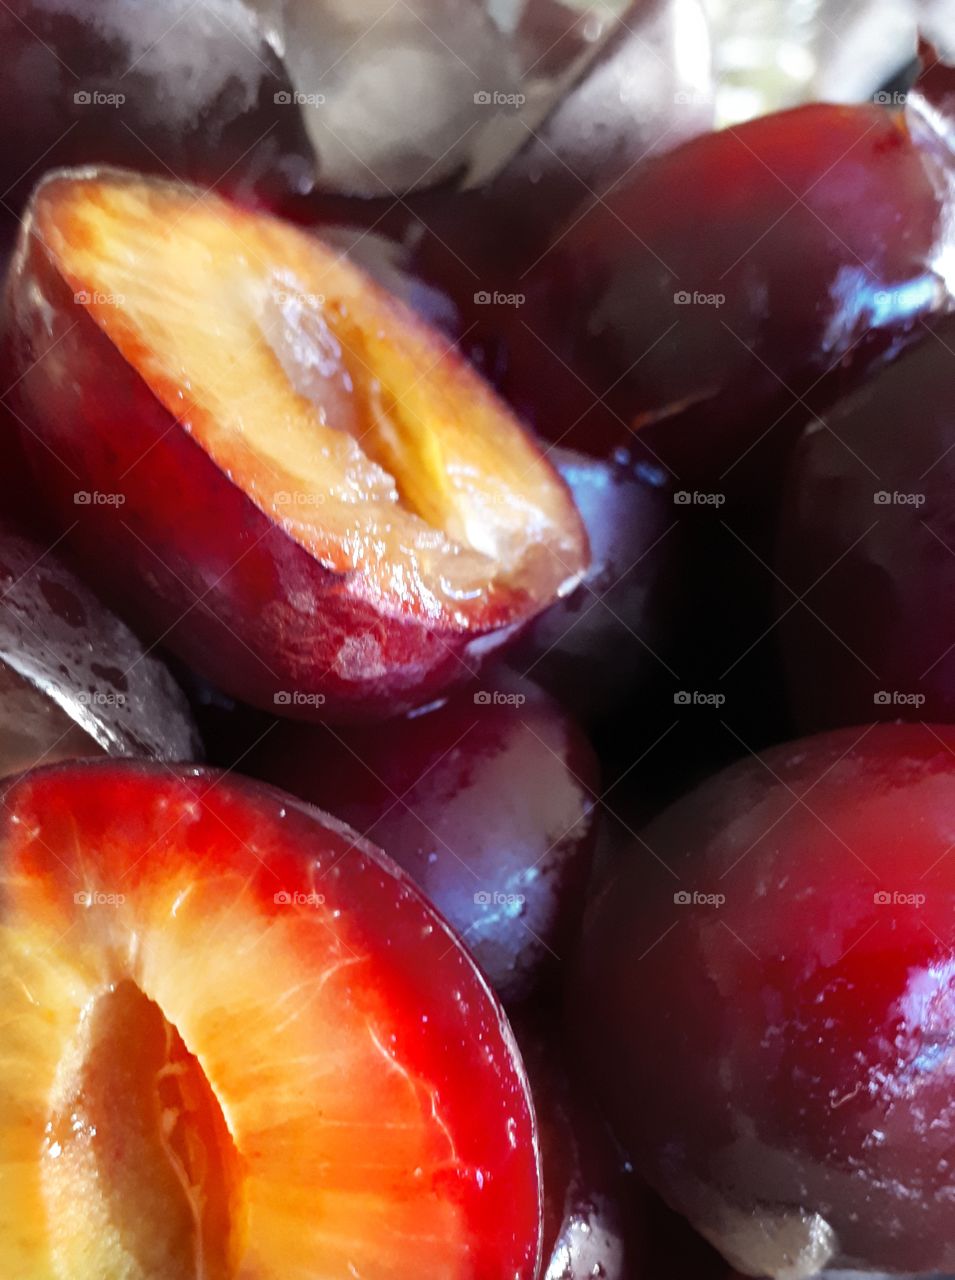 Plums already ripe,  and it is time to bring these plump and juicy babies to the table.